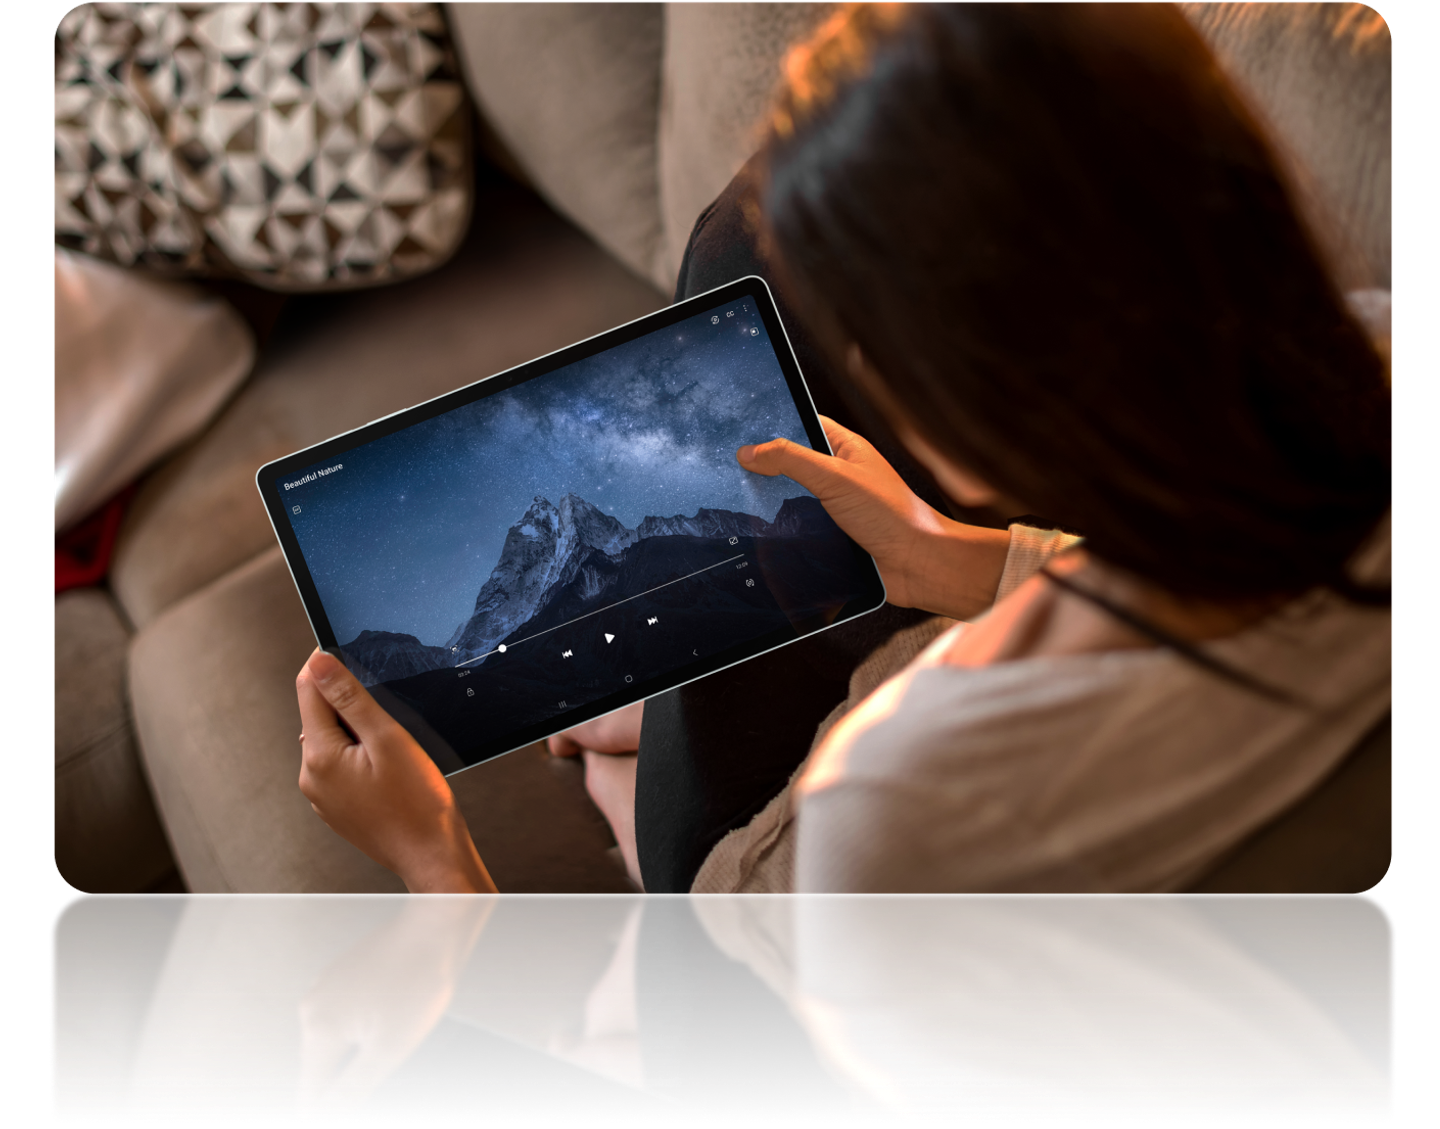 Image of a person holding the galaxy tablet and streaming a video displaying a mountain and a sky with stars.